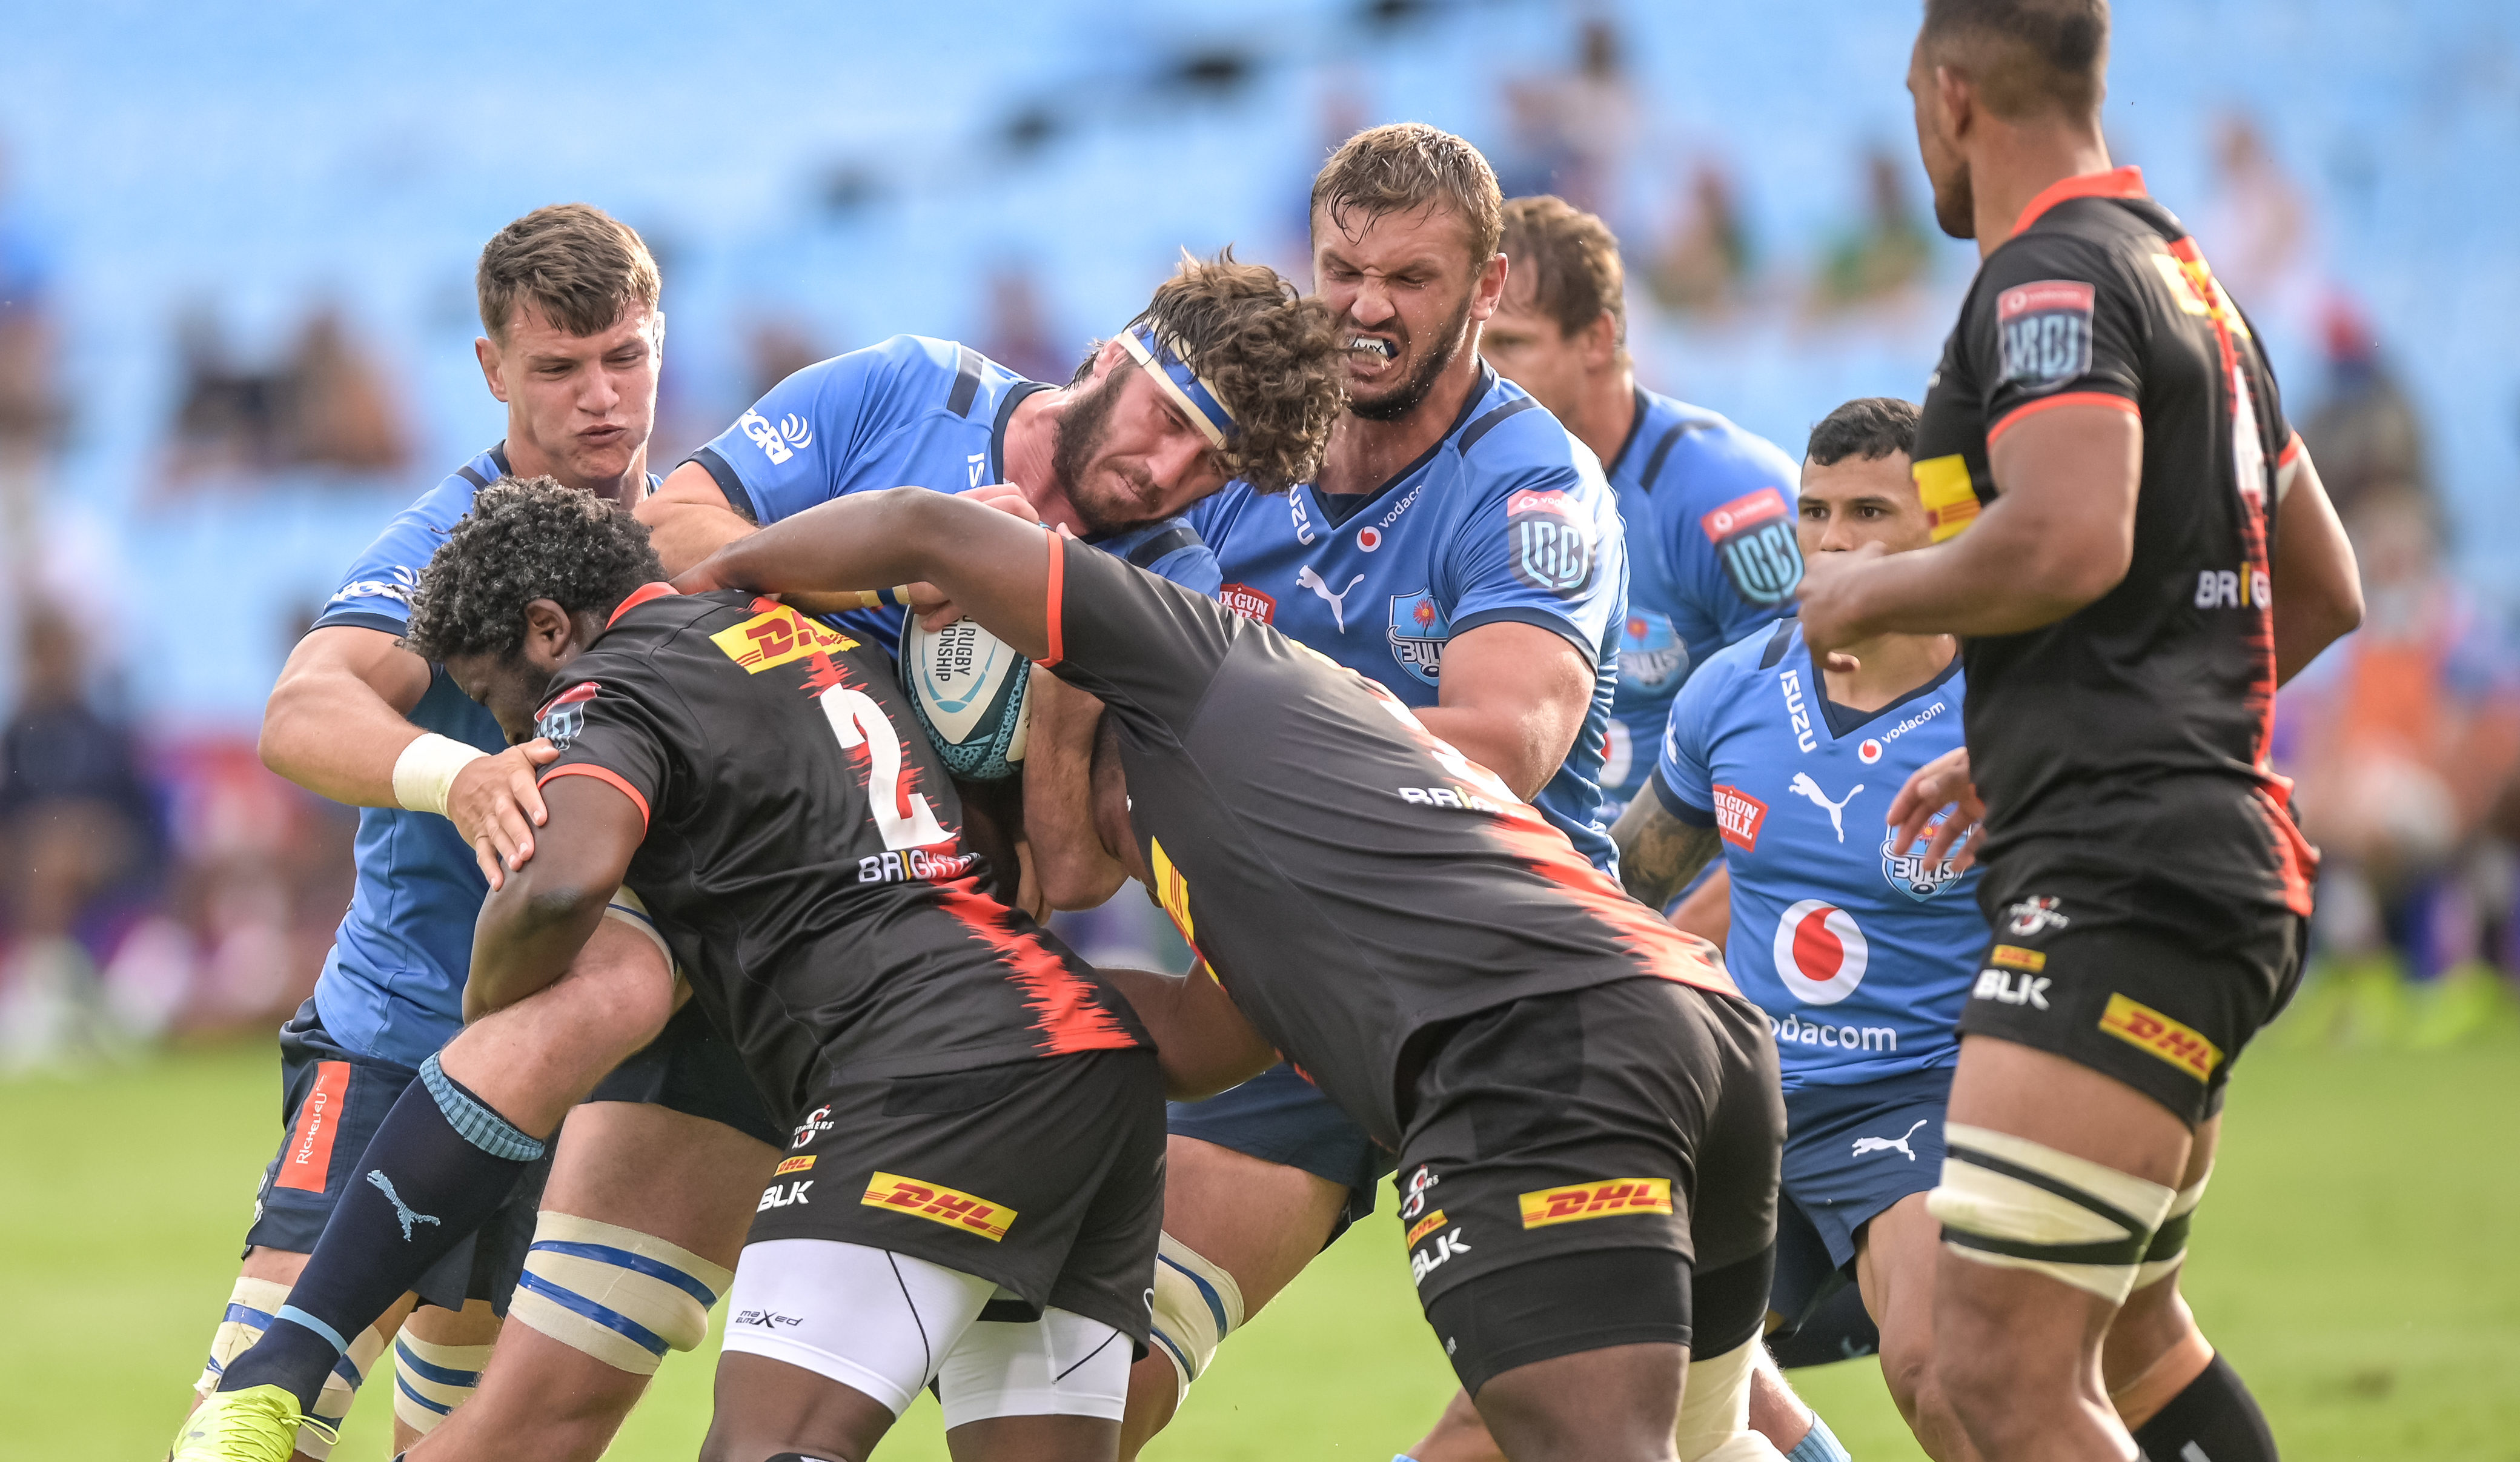 Ruan Nortje of the Vodacom Bulls during the United Rugby Championship 2021/22 game between the Vodacom Bulls and the DHL Stormers at Loftus Versfeld in Pretoria on 22 January 2022 ©Christiaan Kotze/BackpagePix